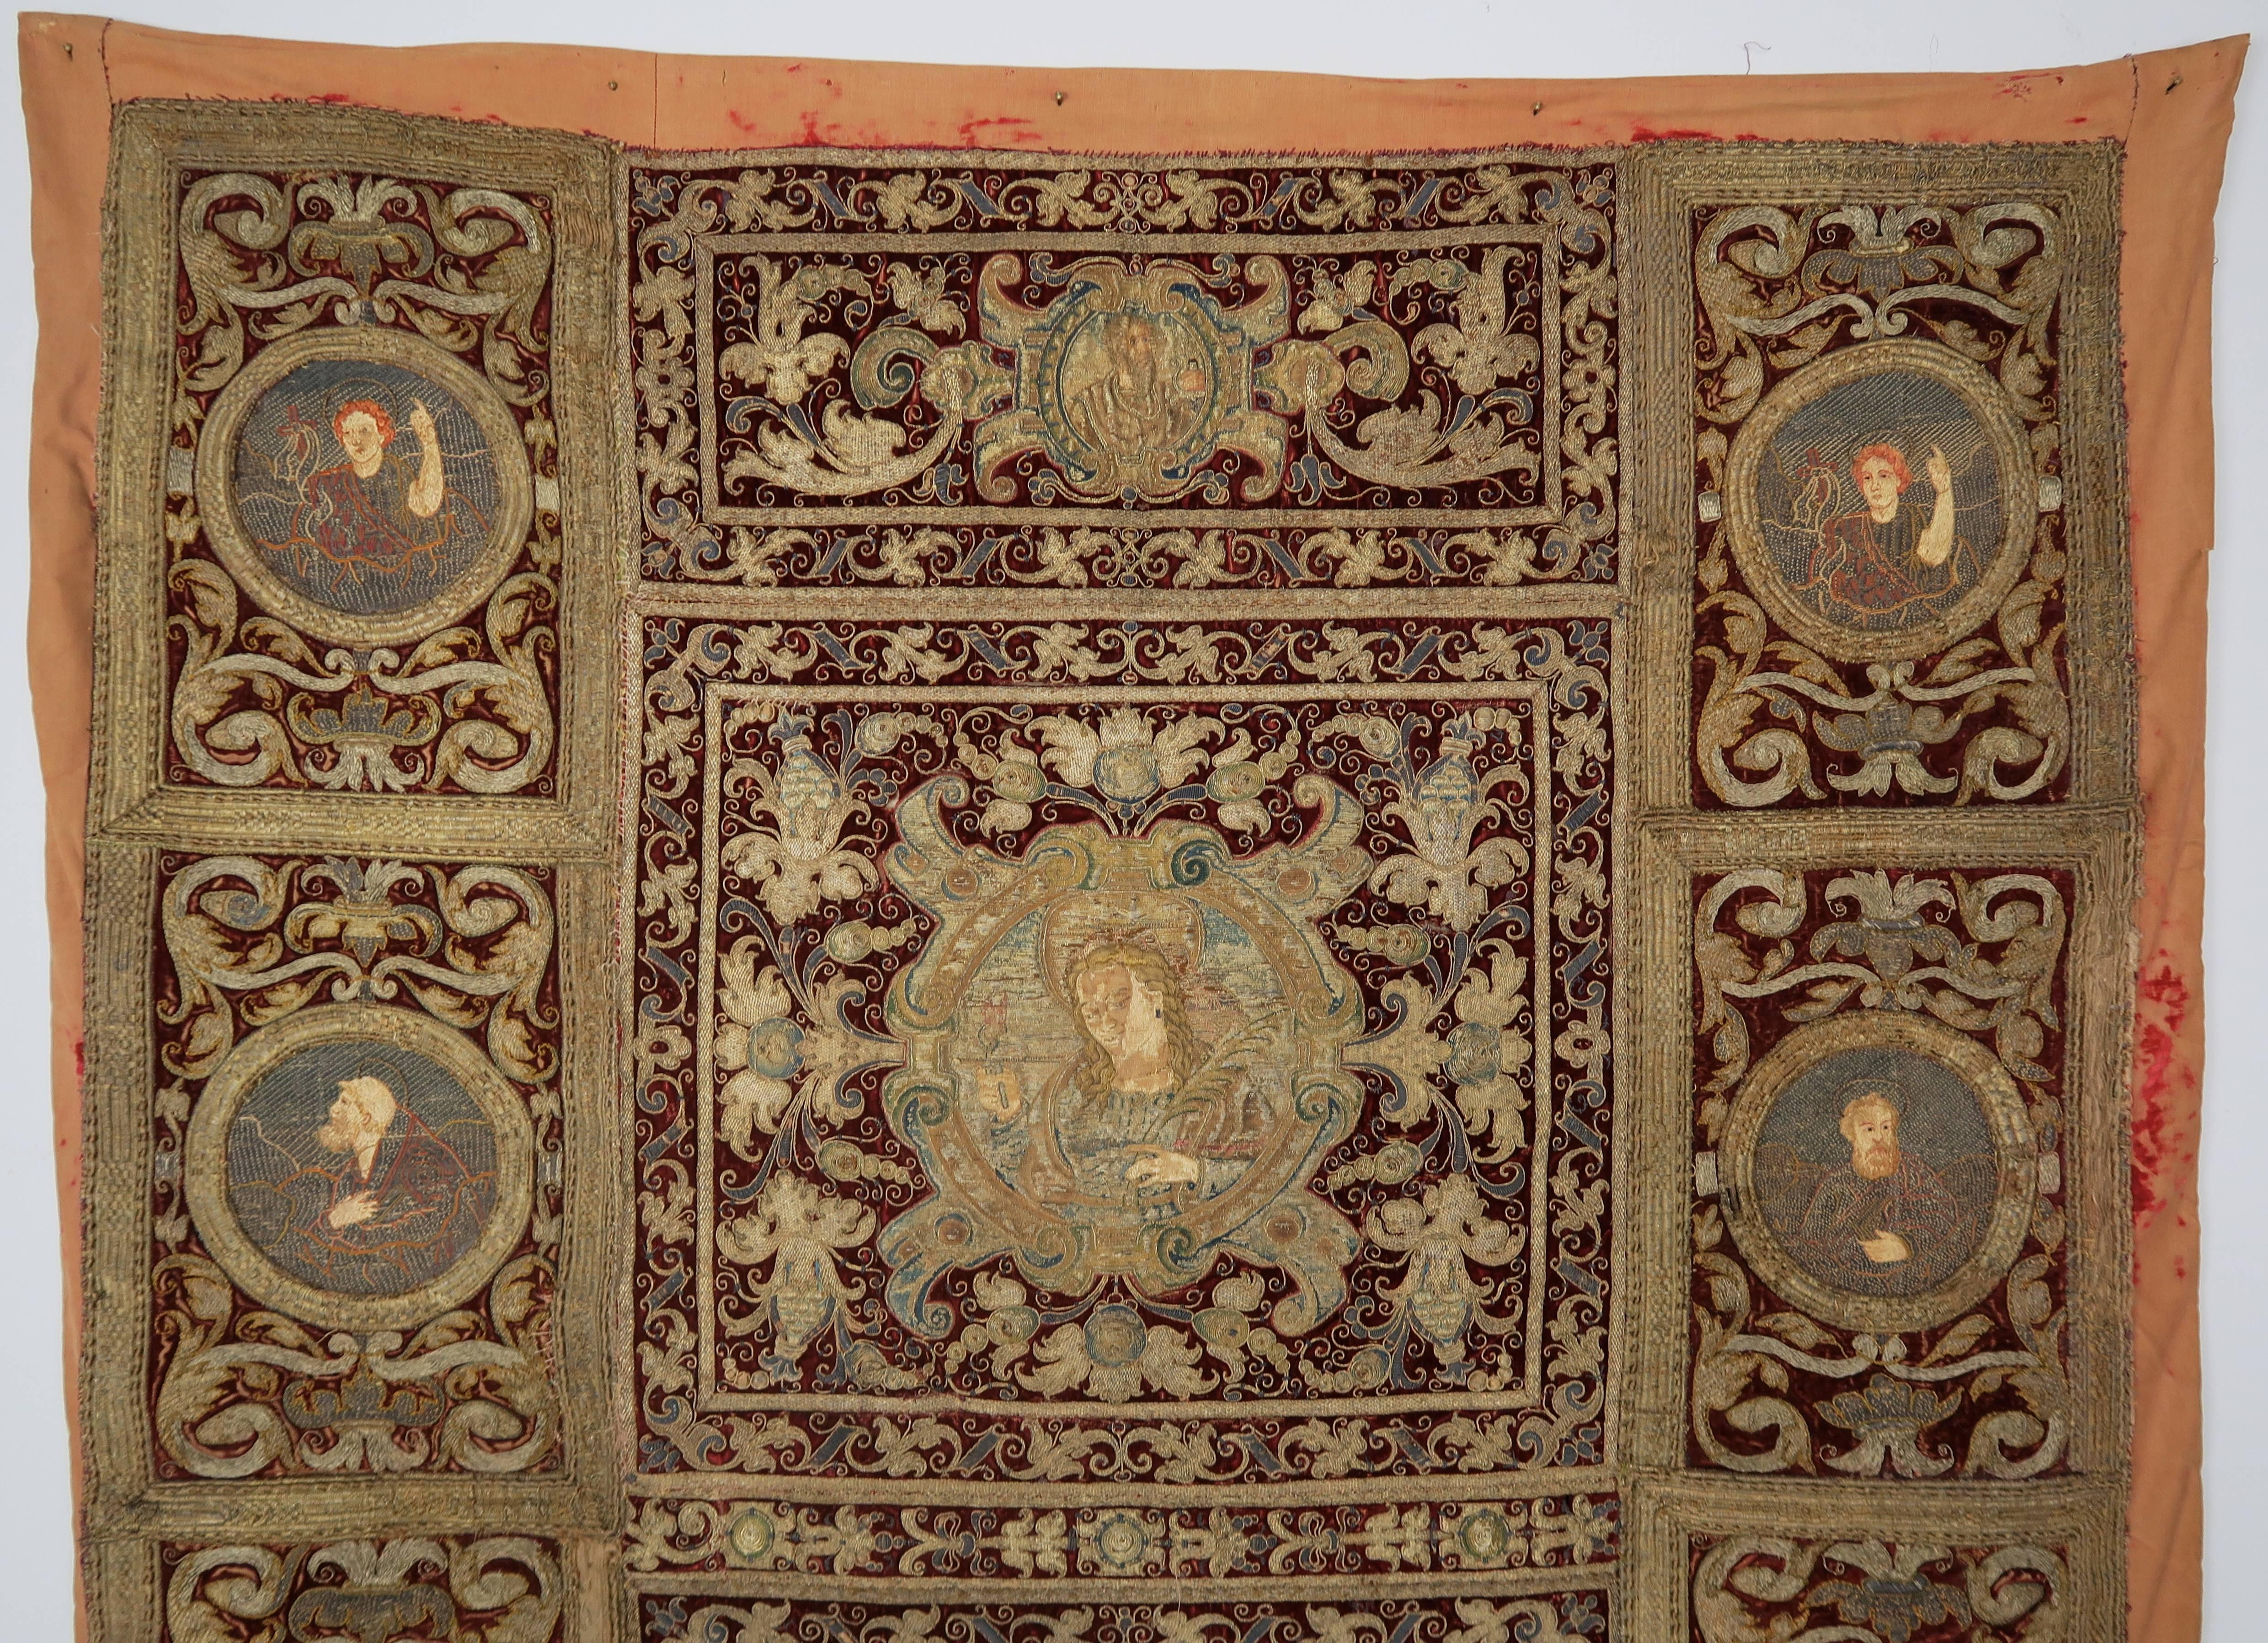 Detailed, 18th Century Italian metallic embroidered Tapestry with Velvet silk border with metallic appliques throughout and metallic fringe trim at bottom edge. Dark crimson red with gold circular frames of various saints are finely done in